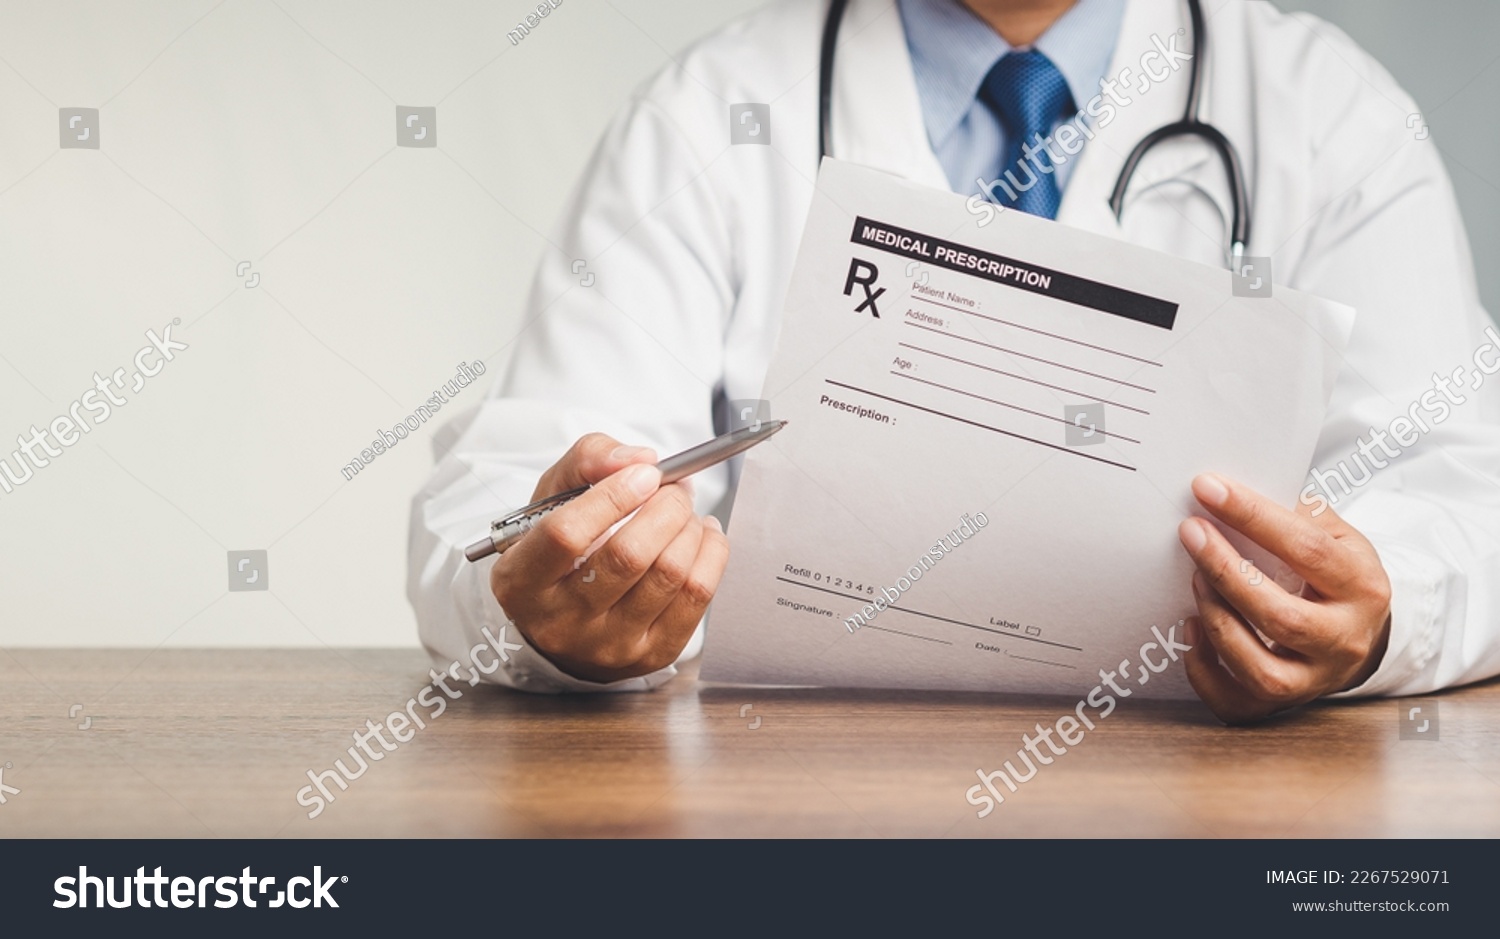 A doctor is holding a pen and a medical prescription while sitting in the hospital. Medical personnel, medicine, and science concept. Quality medical services #2267529071